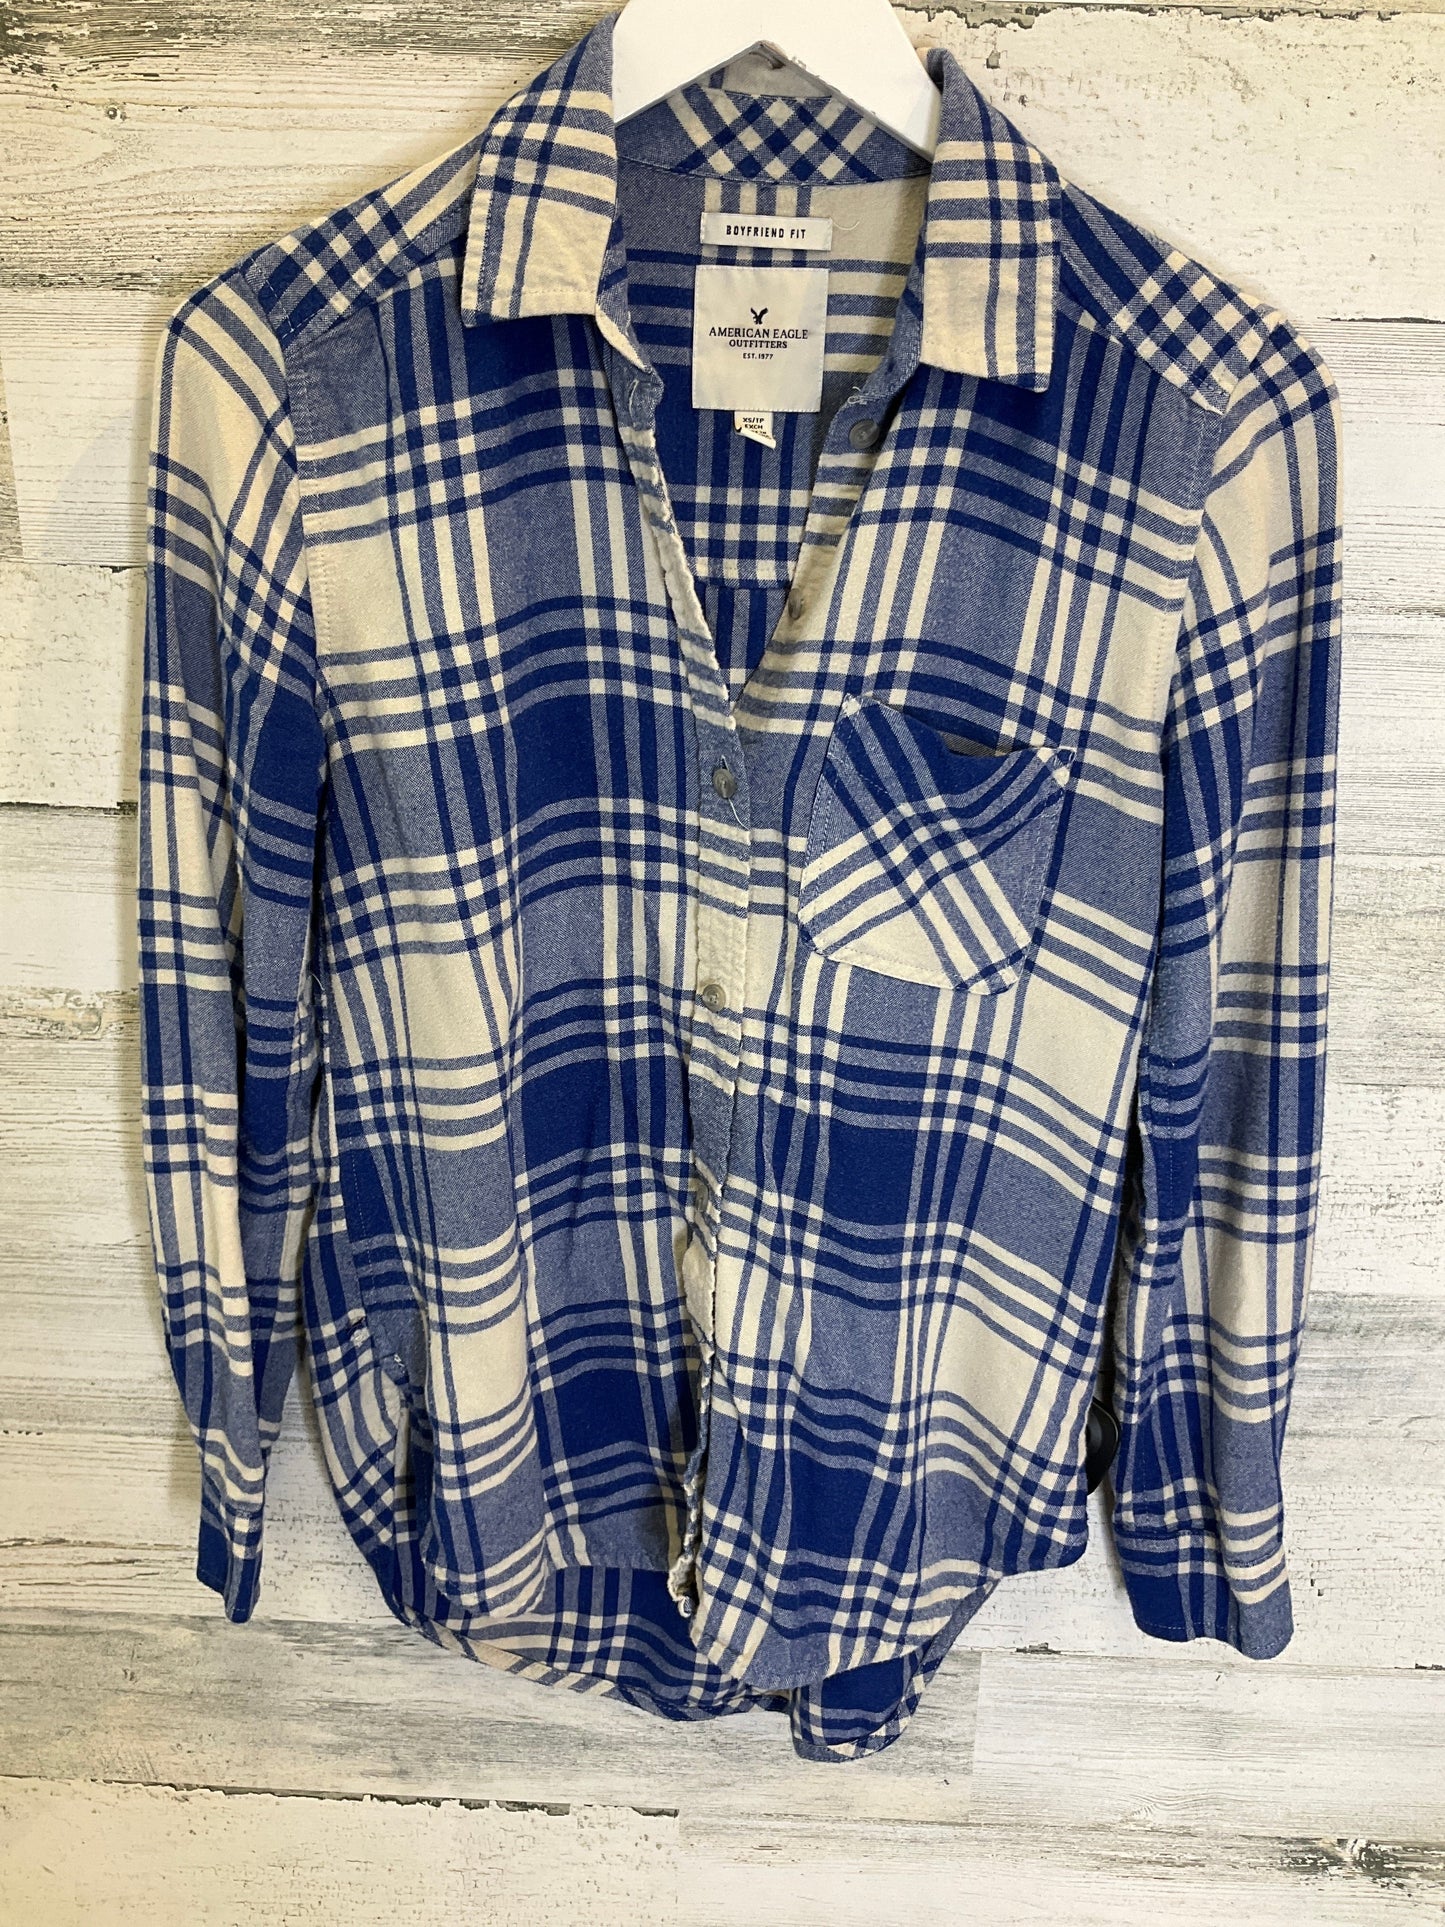 Blue & White Top Long Sleeve American Eagle, Size Xs